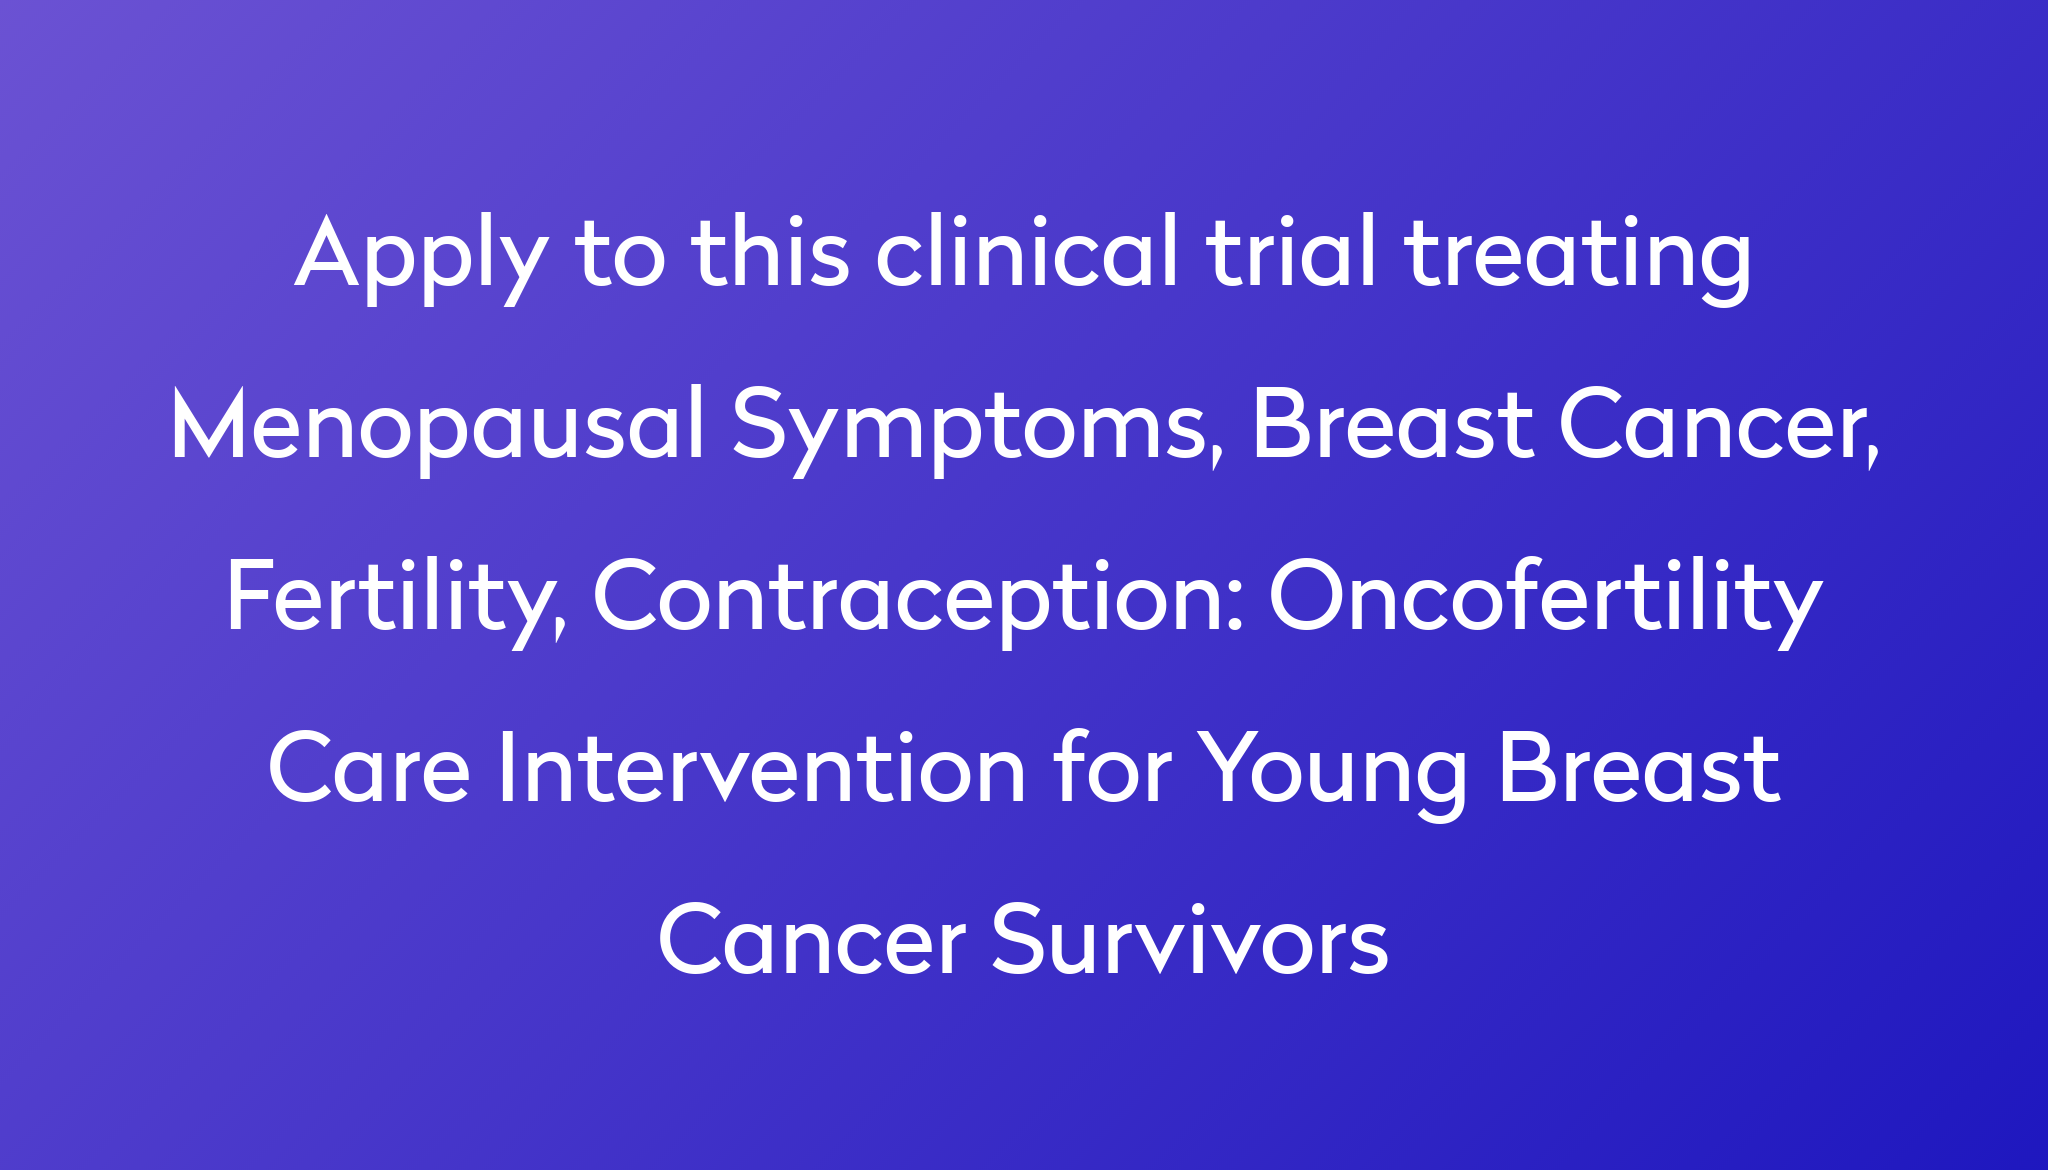 Oncofertility Care Intervention for Young Breast Cancer Survivors